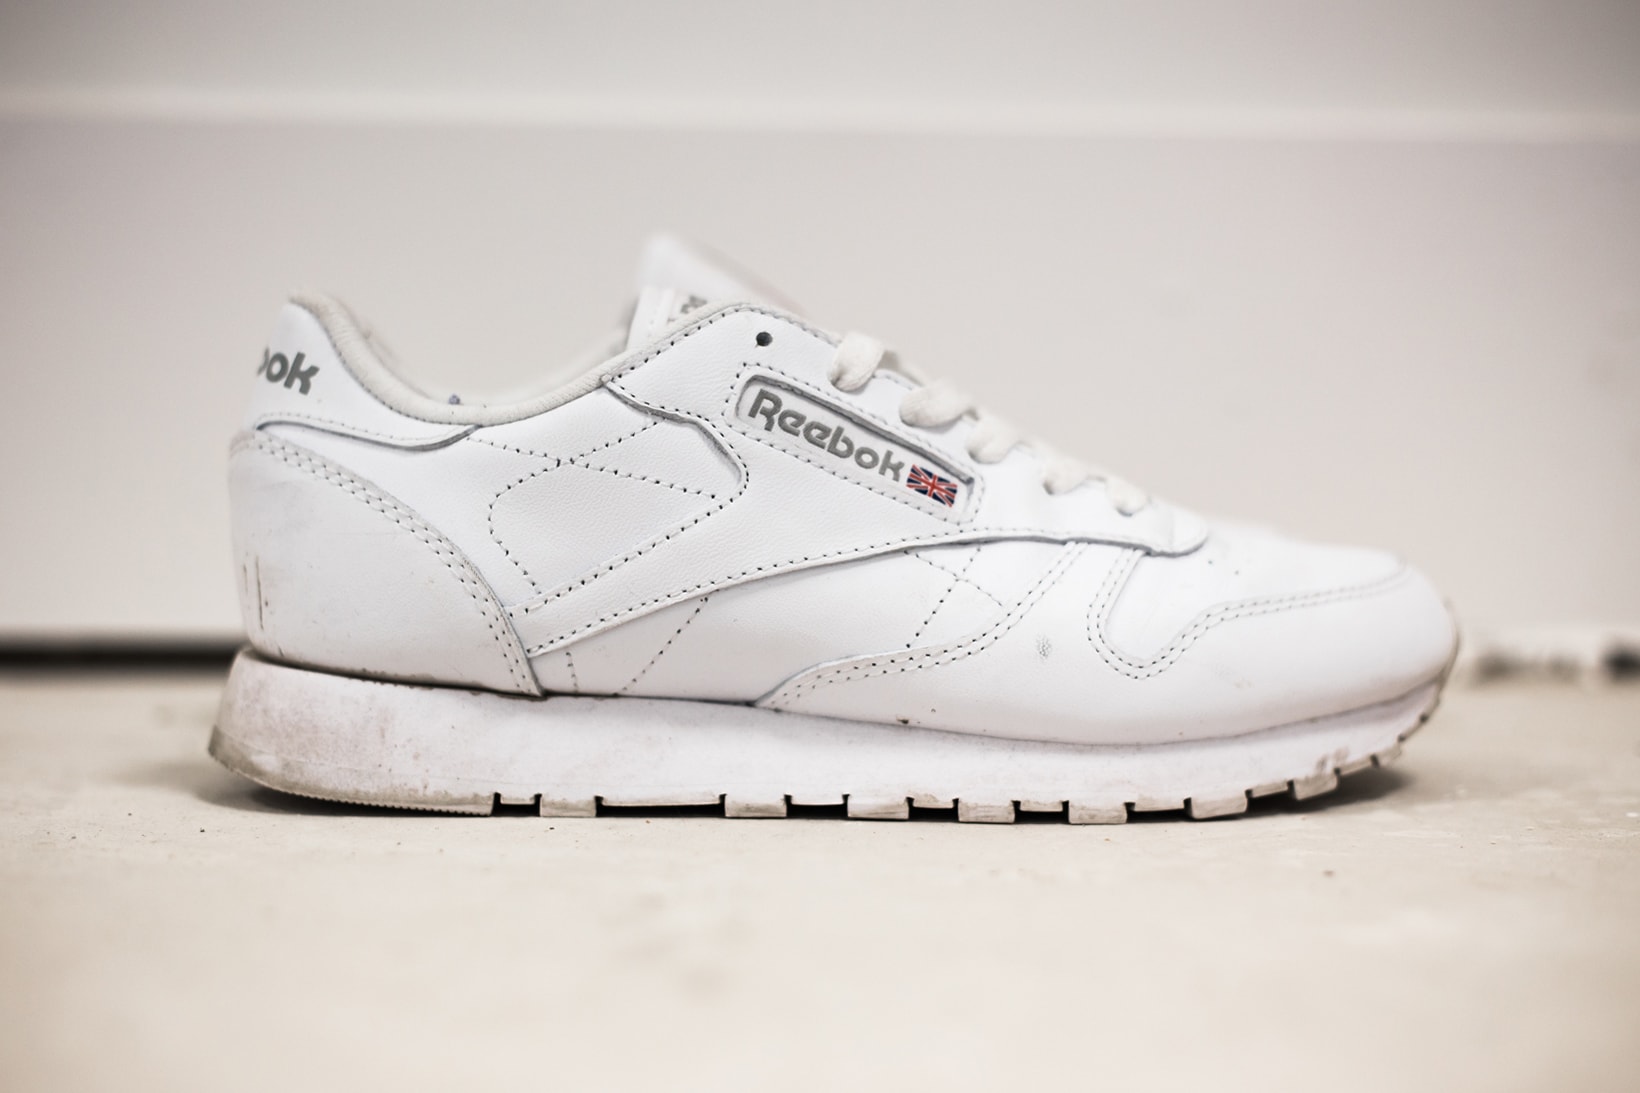 REEBOK Classic Leather Womens Shoes - WHITE